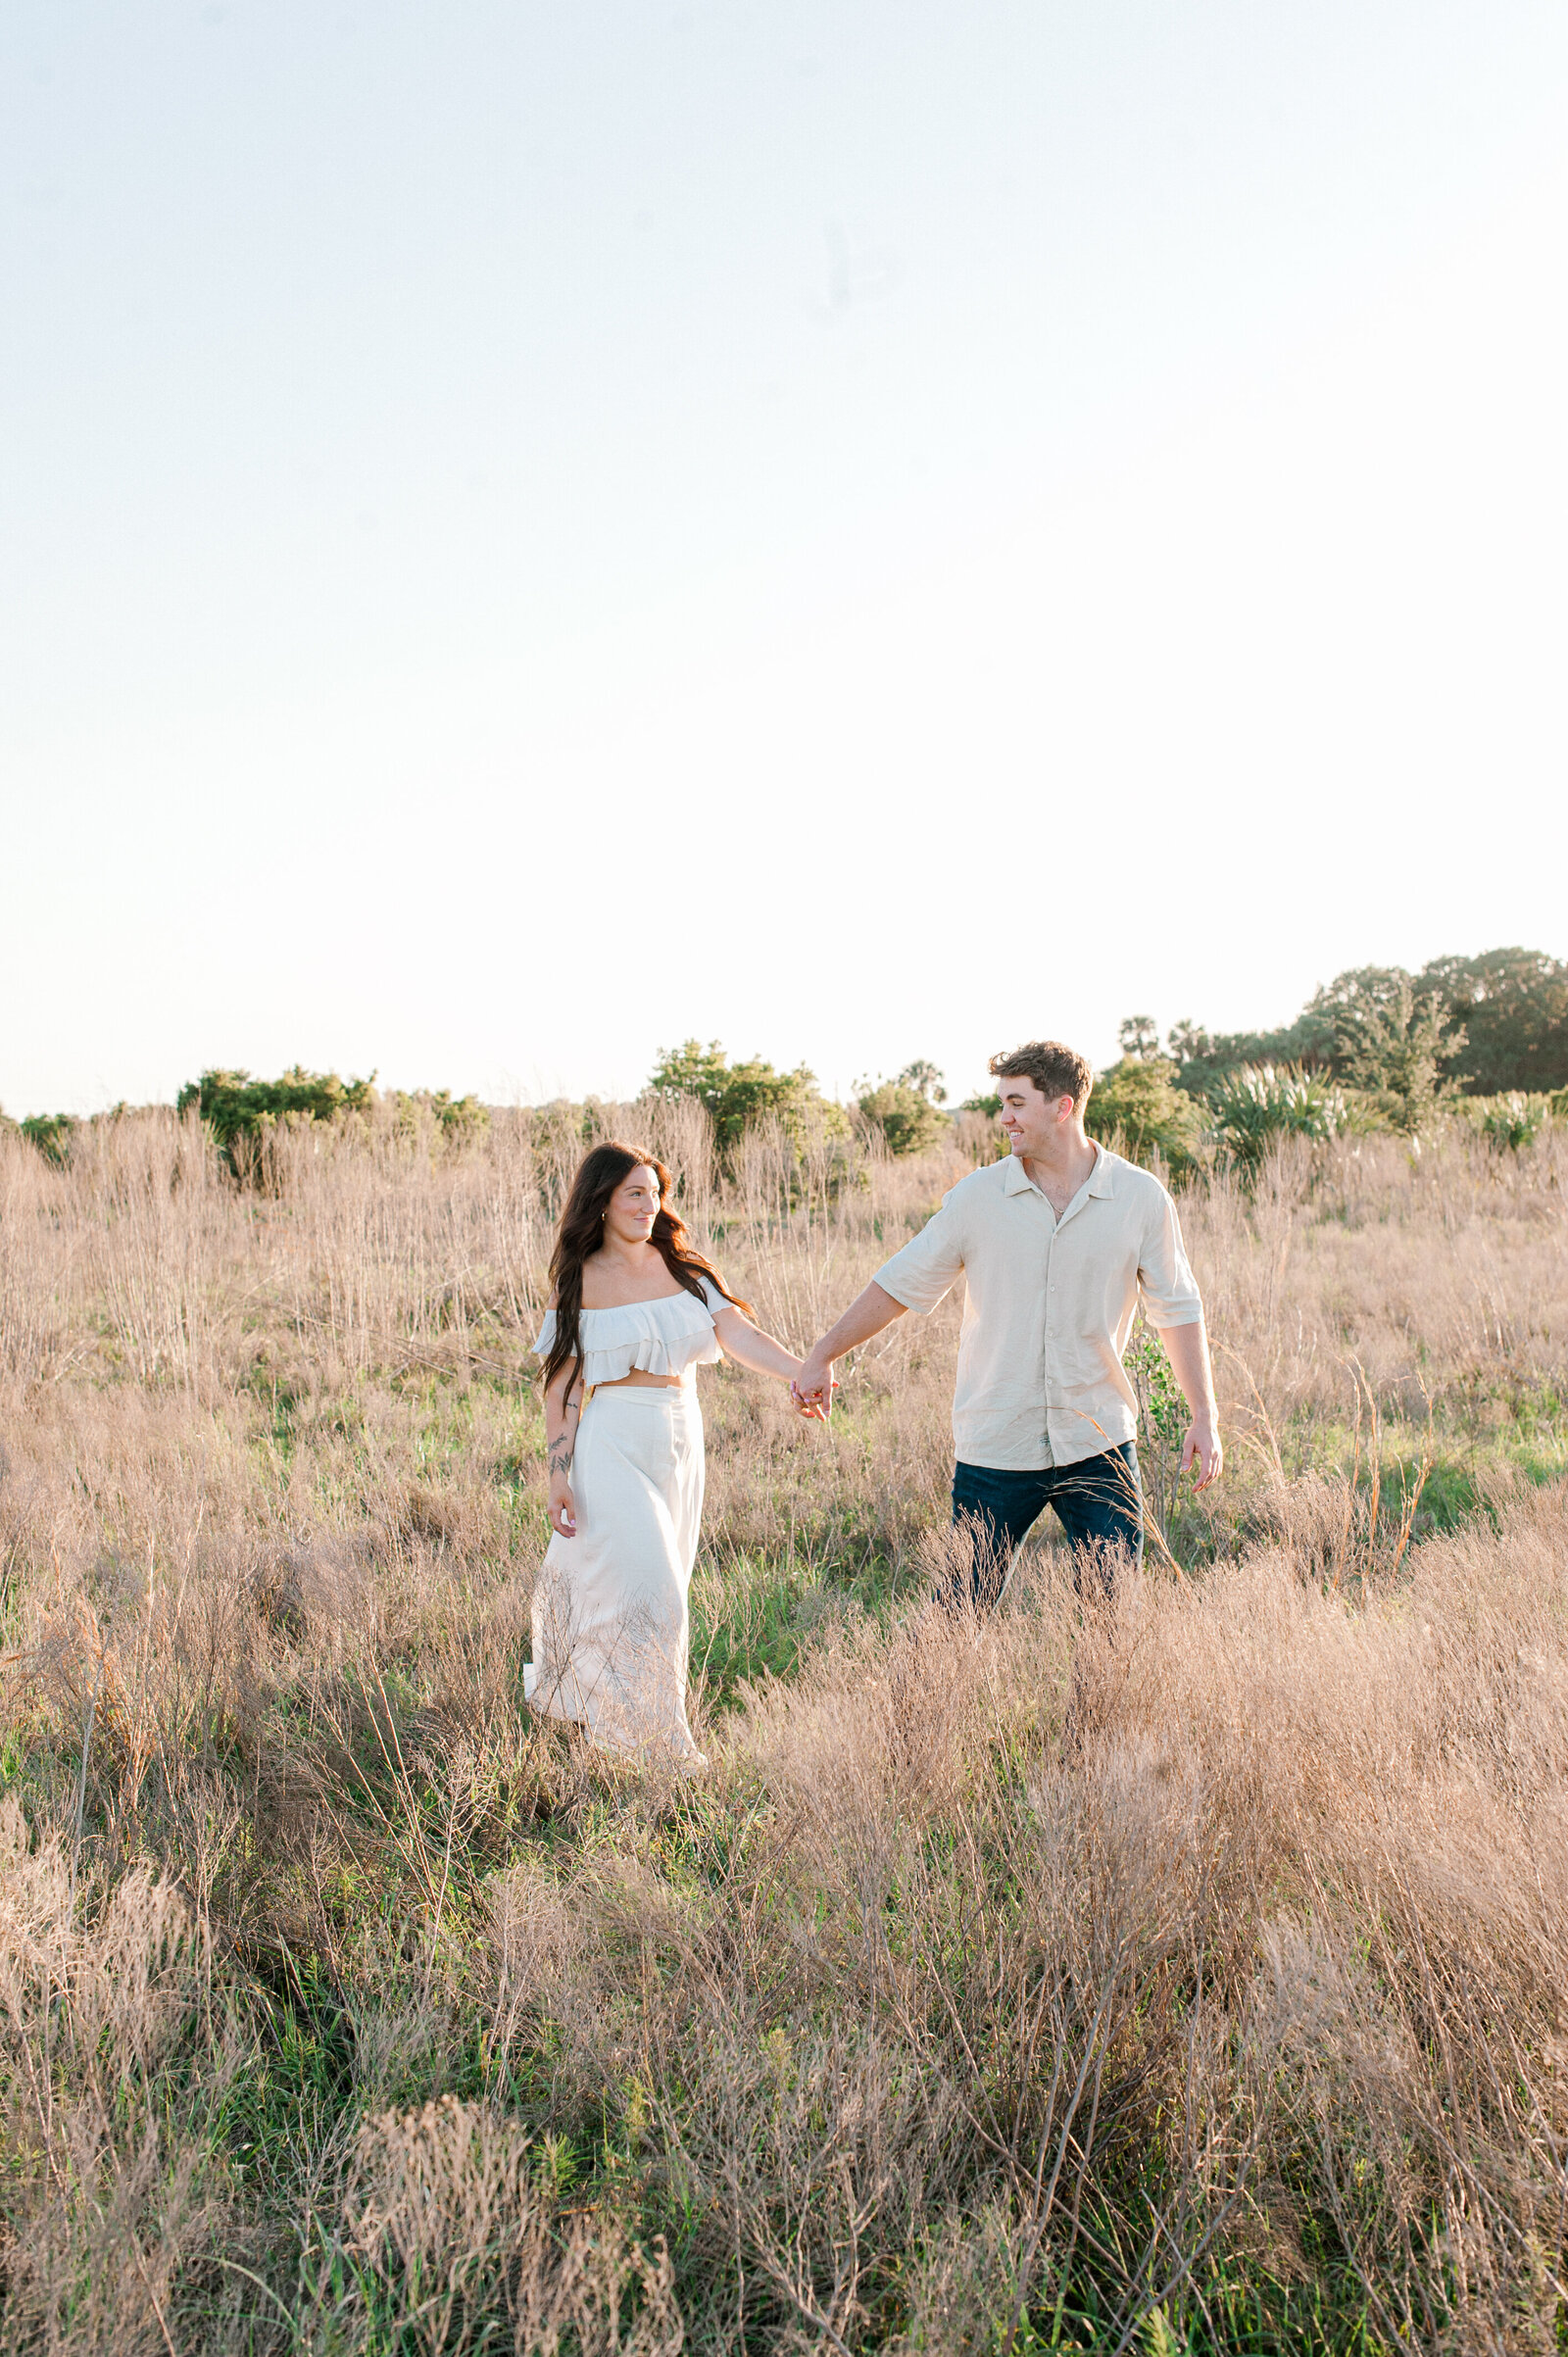 Couple holding hands and walking through a tall grass field during their photo session with an Orlando couples photographer